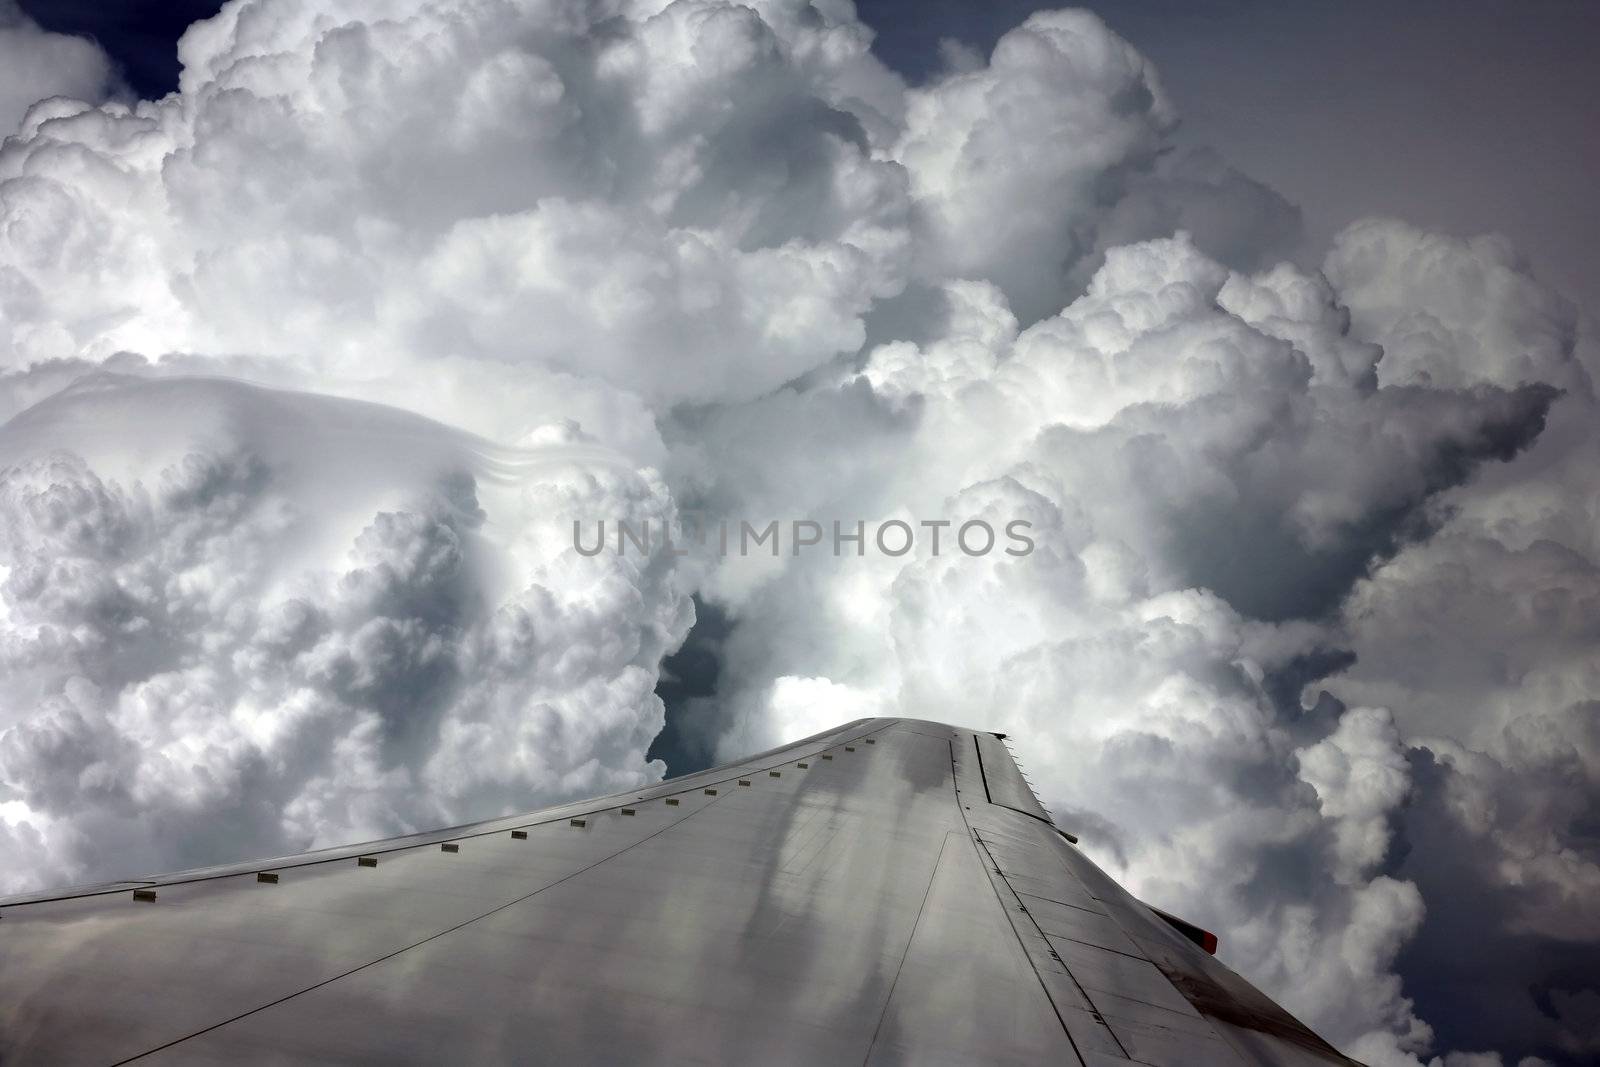 Wing of the plane on a background of clouds